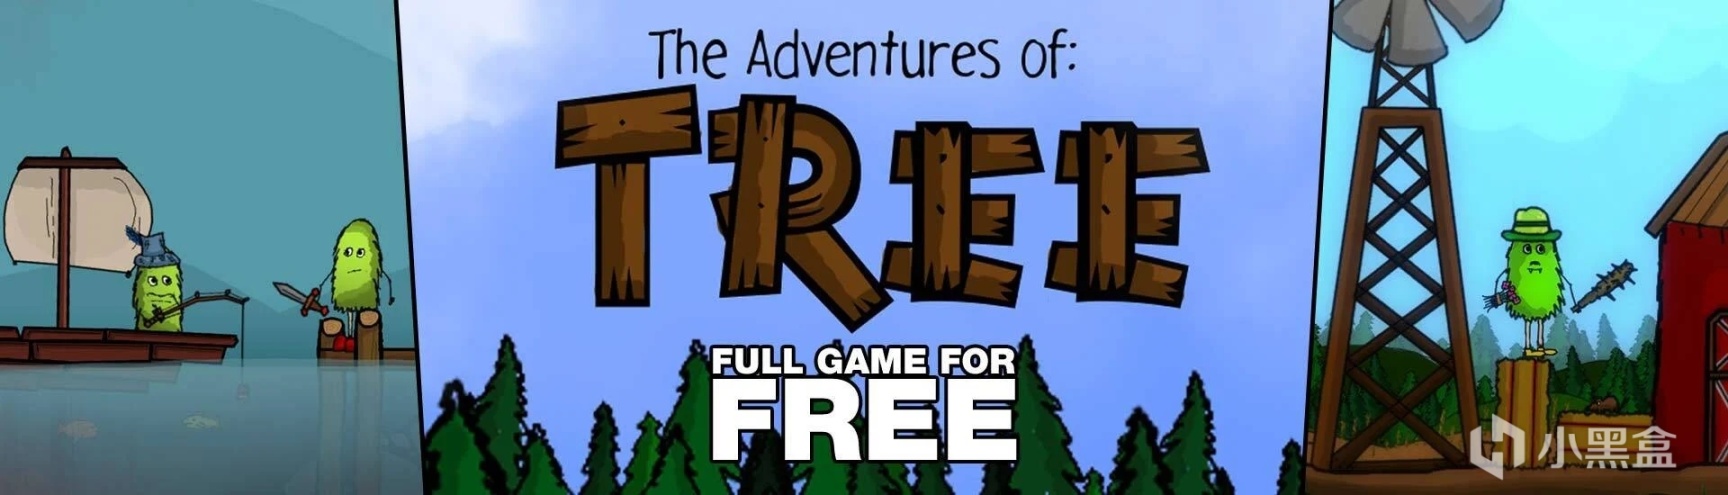 【indiegala喜加一】免费领取《The Adventures of Tree树的冒险》